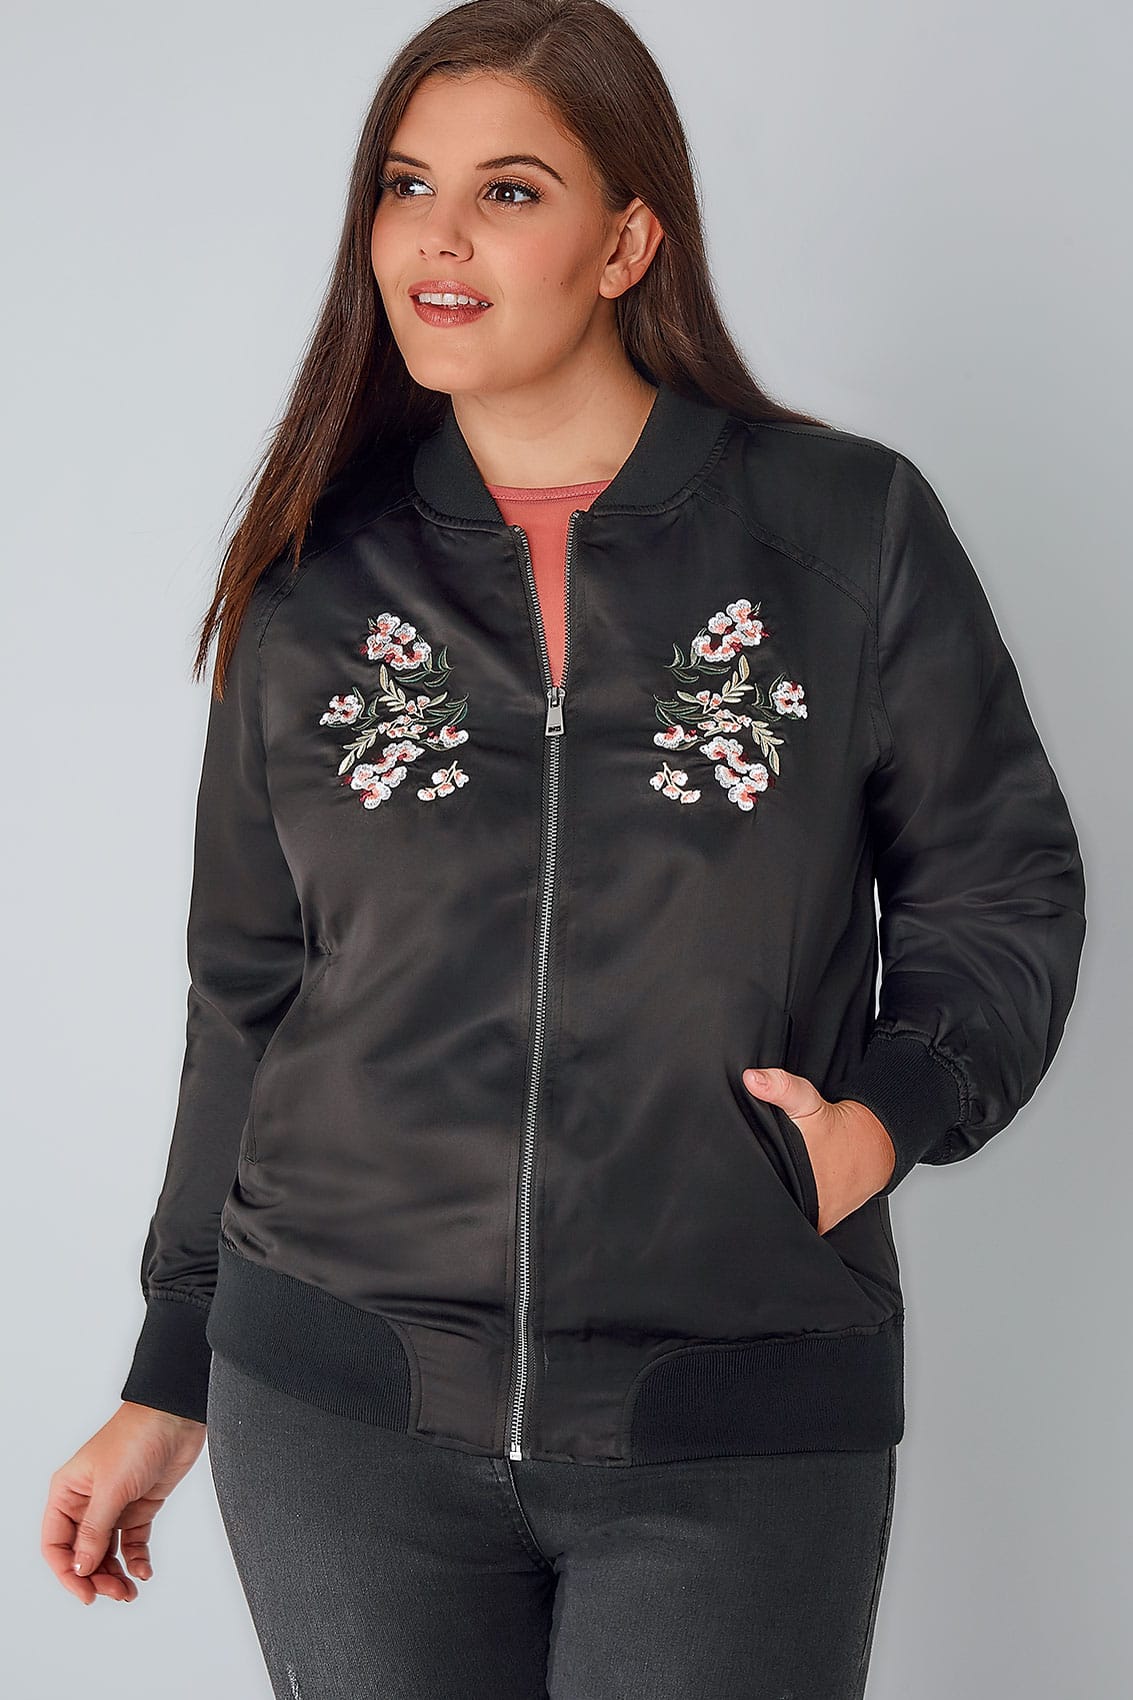 Black Satin Bomber Jacket With Mirror Floral Embroidery, Plus size 16 to 36